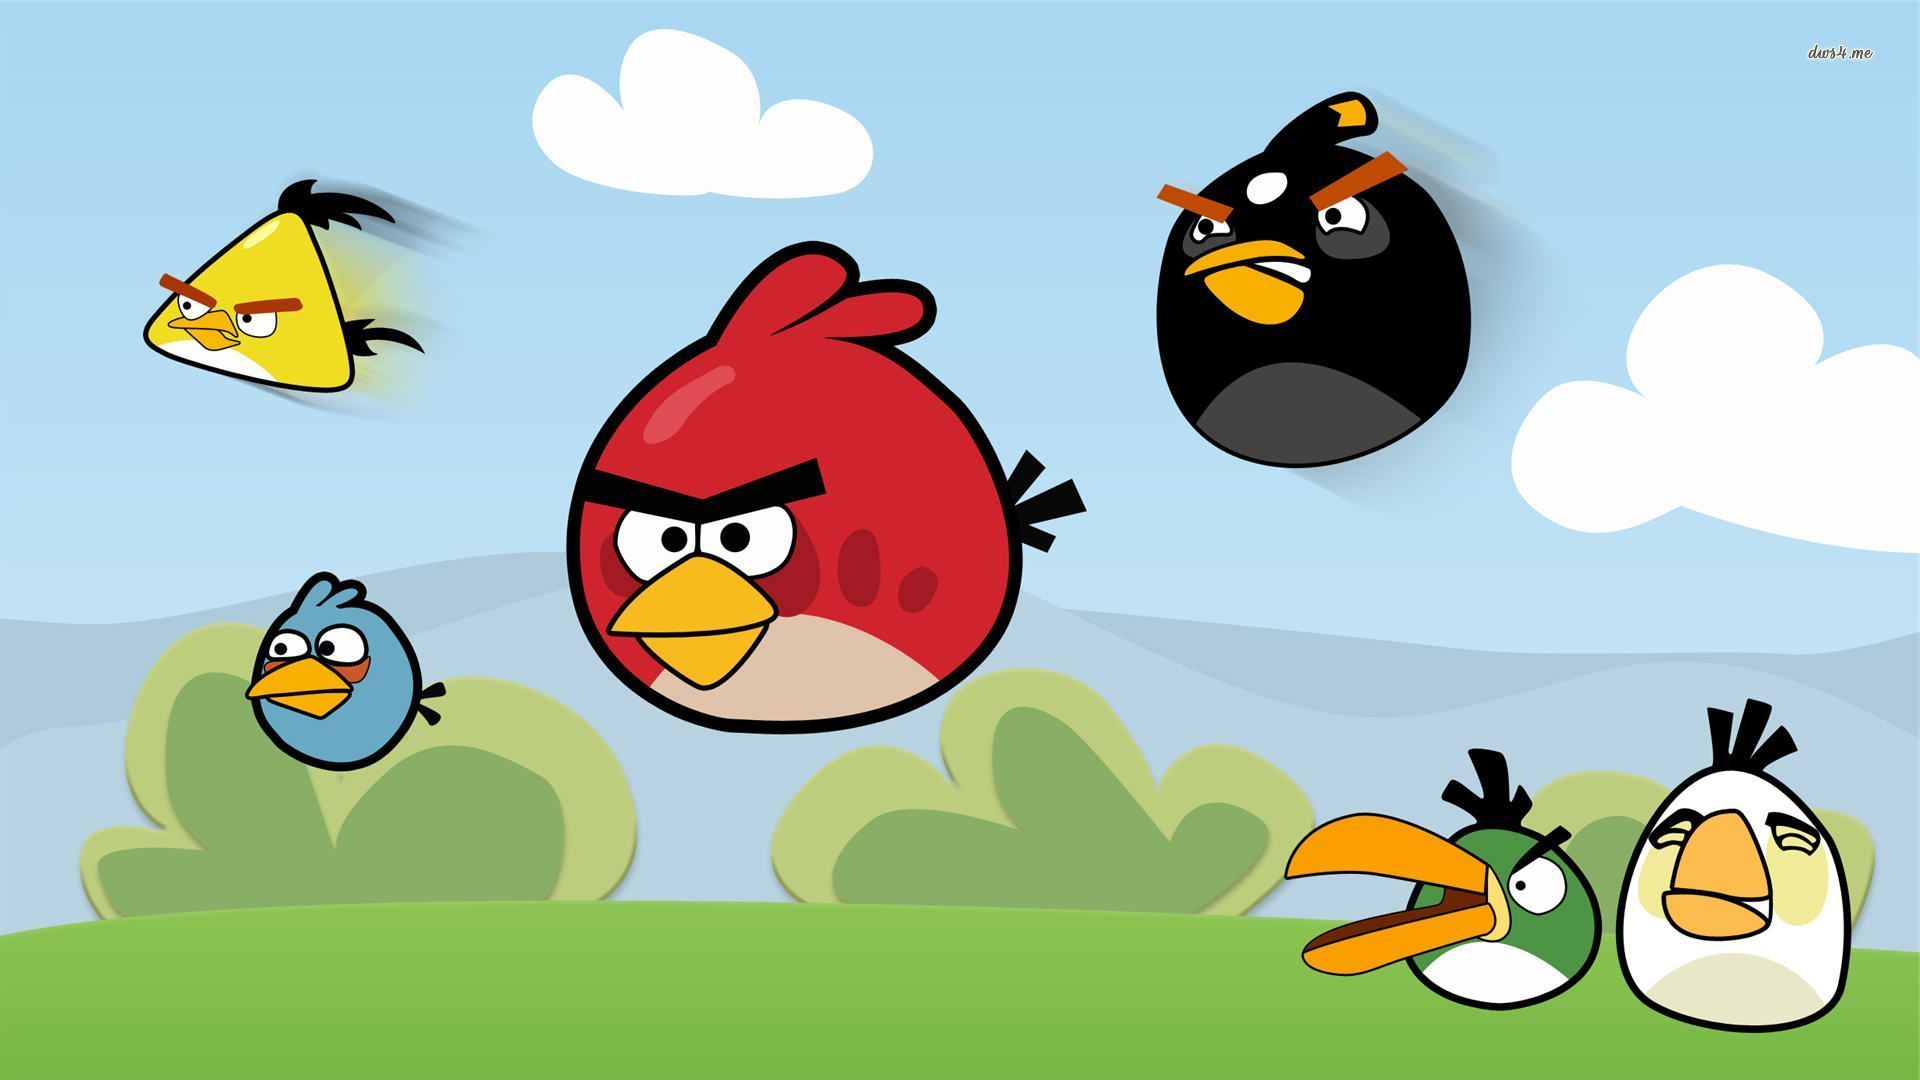 Angry Bird Game Wallpaper 24180 Hd Wallpapers in Games   Imagescicom